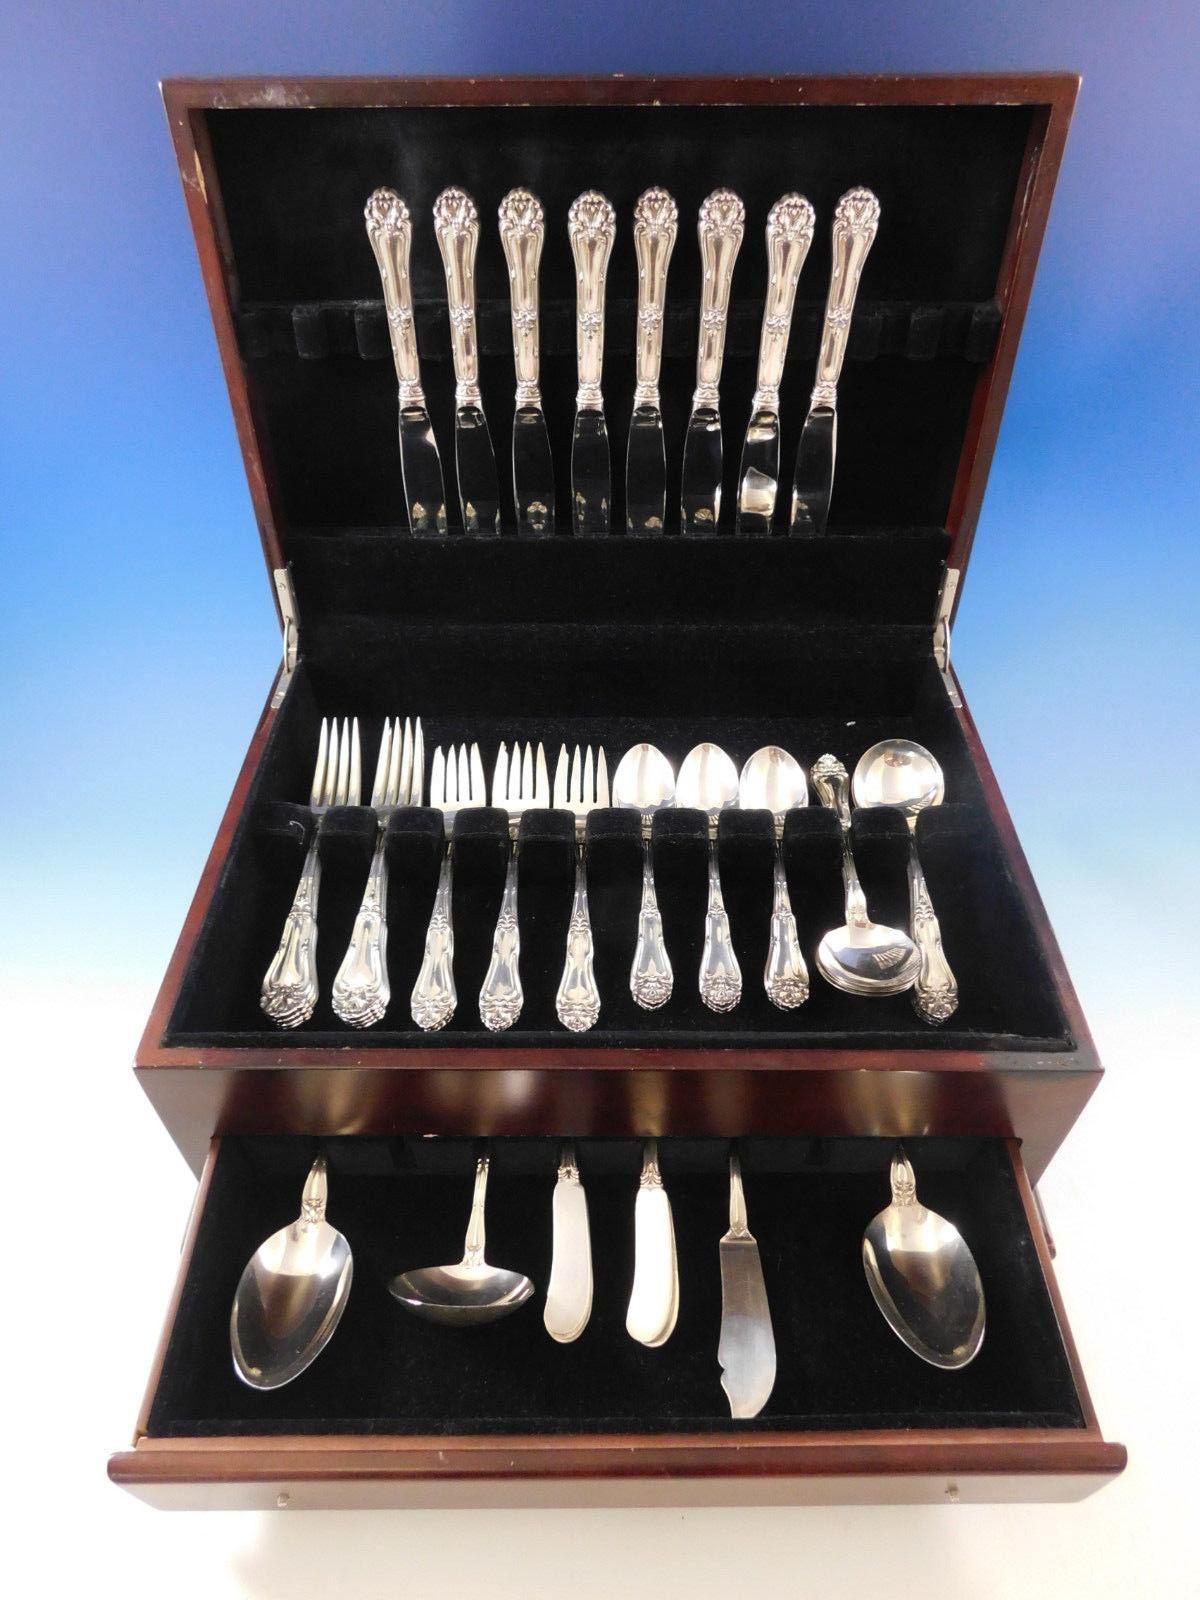 Exquisite Champlain by Amston sterling silver flatware set - 52 pieces. This set includes:

Eight knives, 9